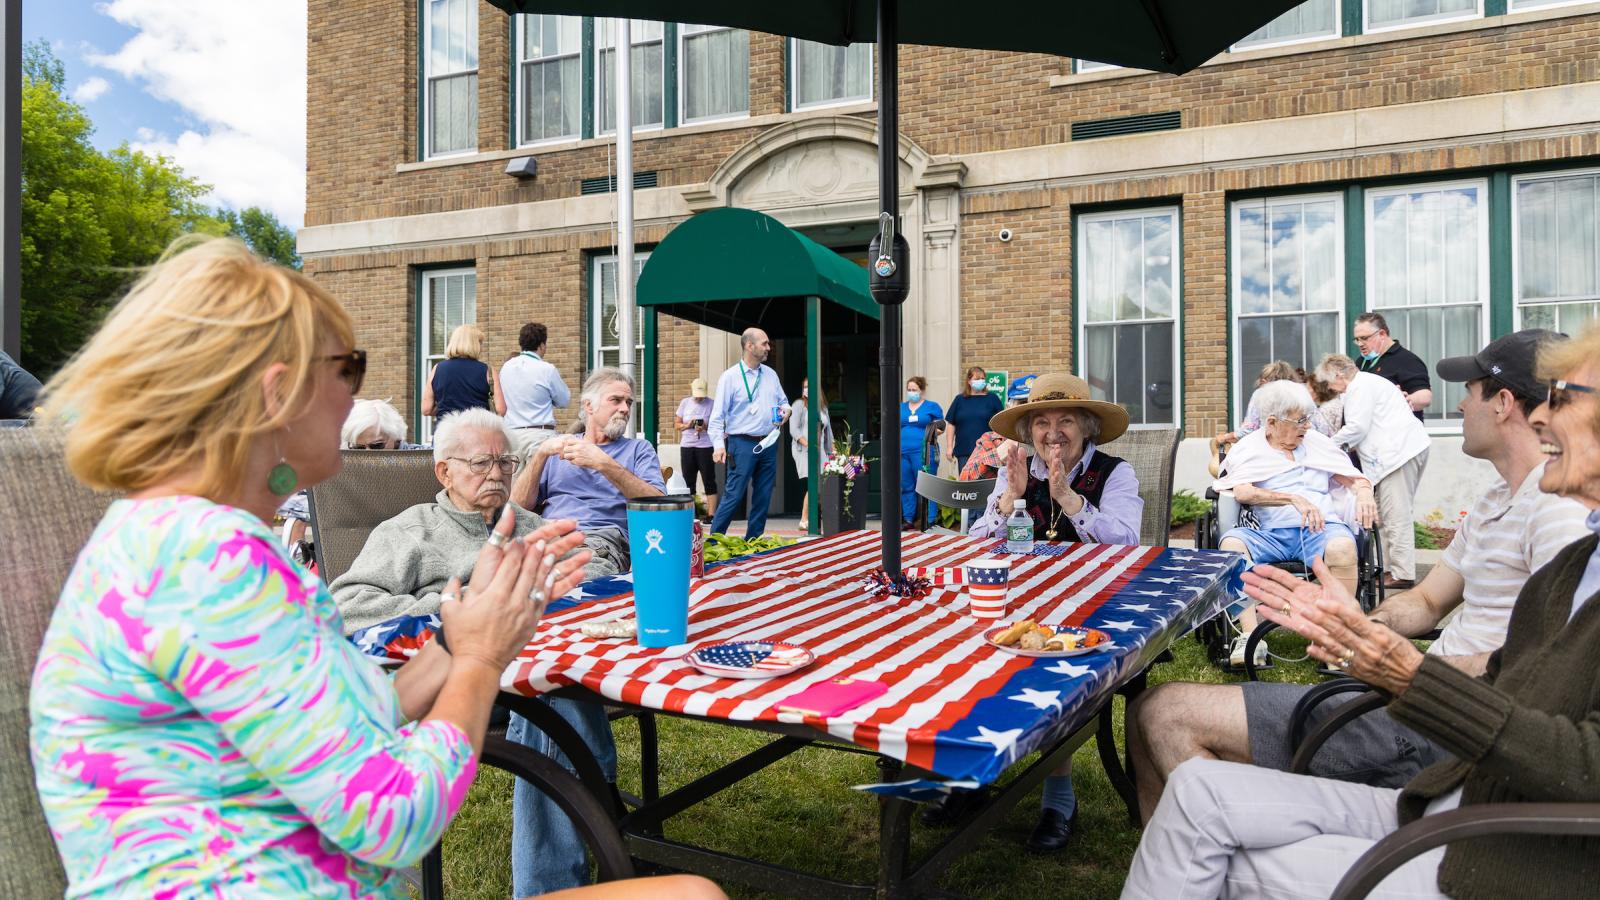 Residents talking while enjoying an outdoor BBQ event.